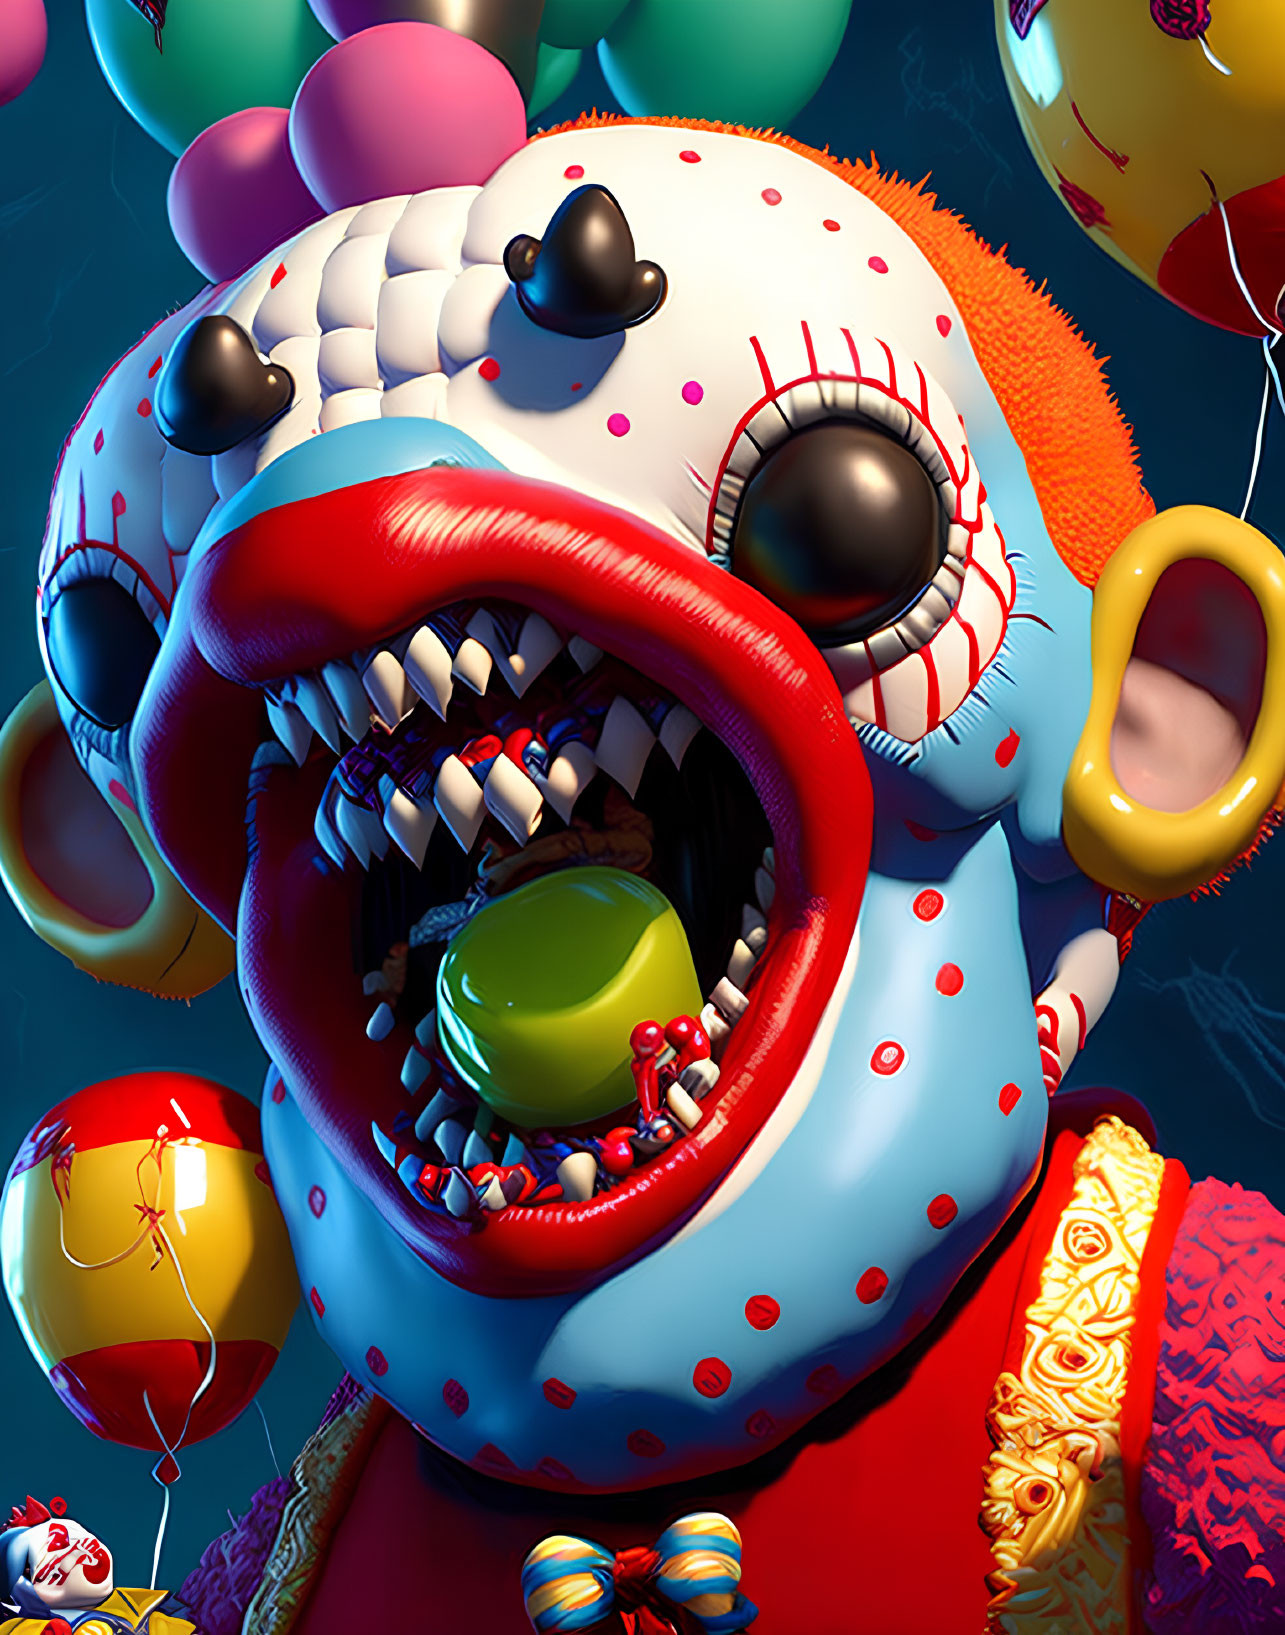 Sinister clown with multiple eyes, sharp teeth, holding balloons